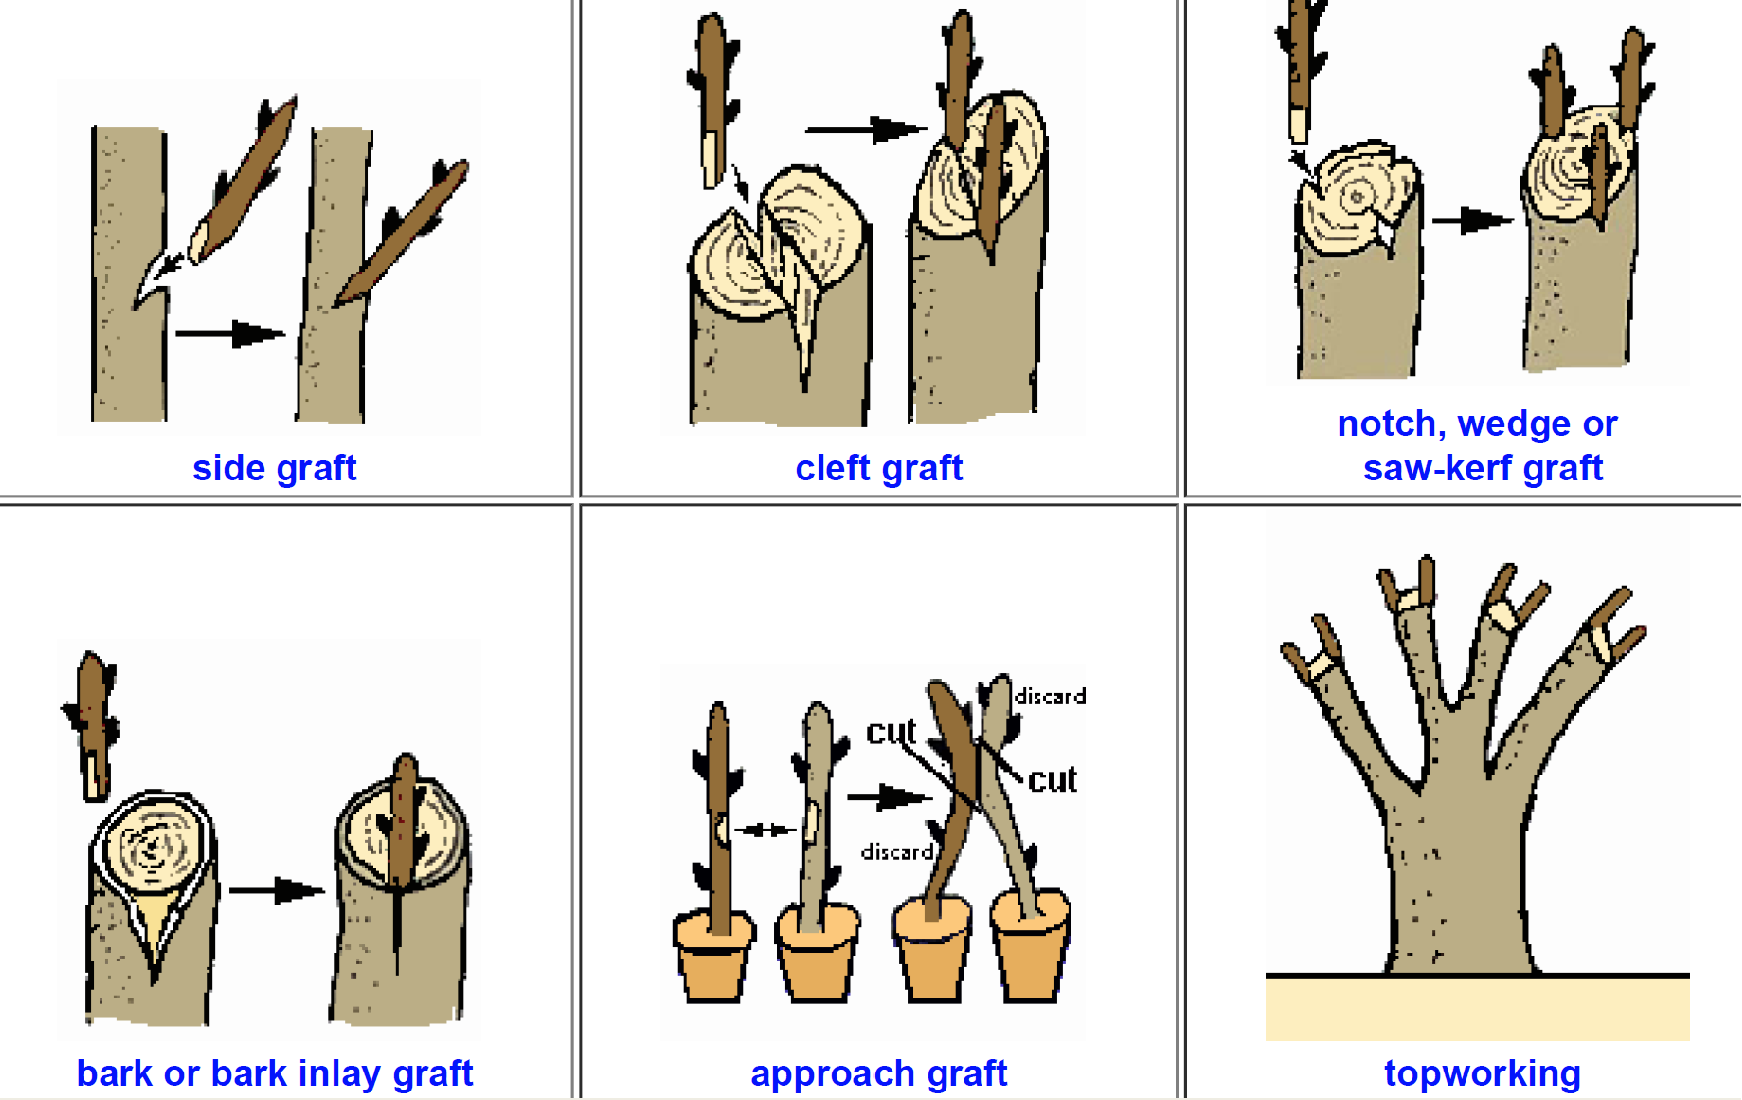 <p>side grafting, cleft grafting, notch (wedge, or saw-kerf) grafting, bark or inlay graft, approach graft, and topworking</p>